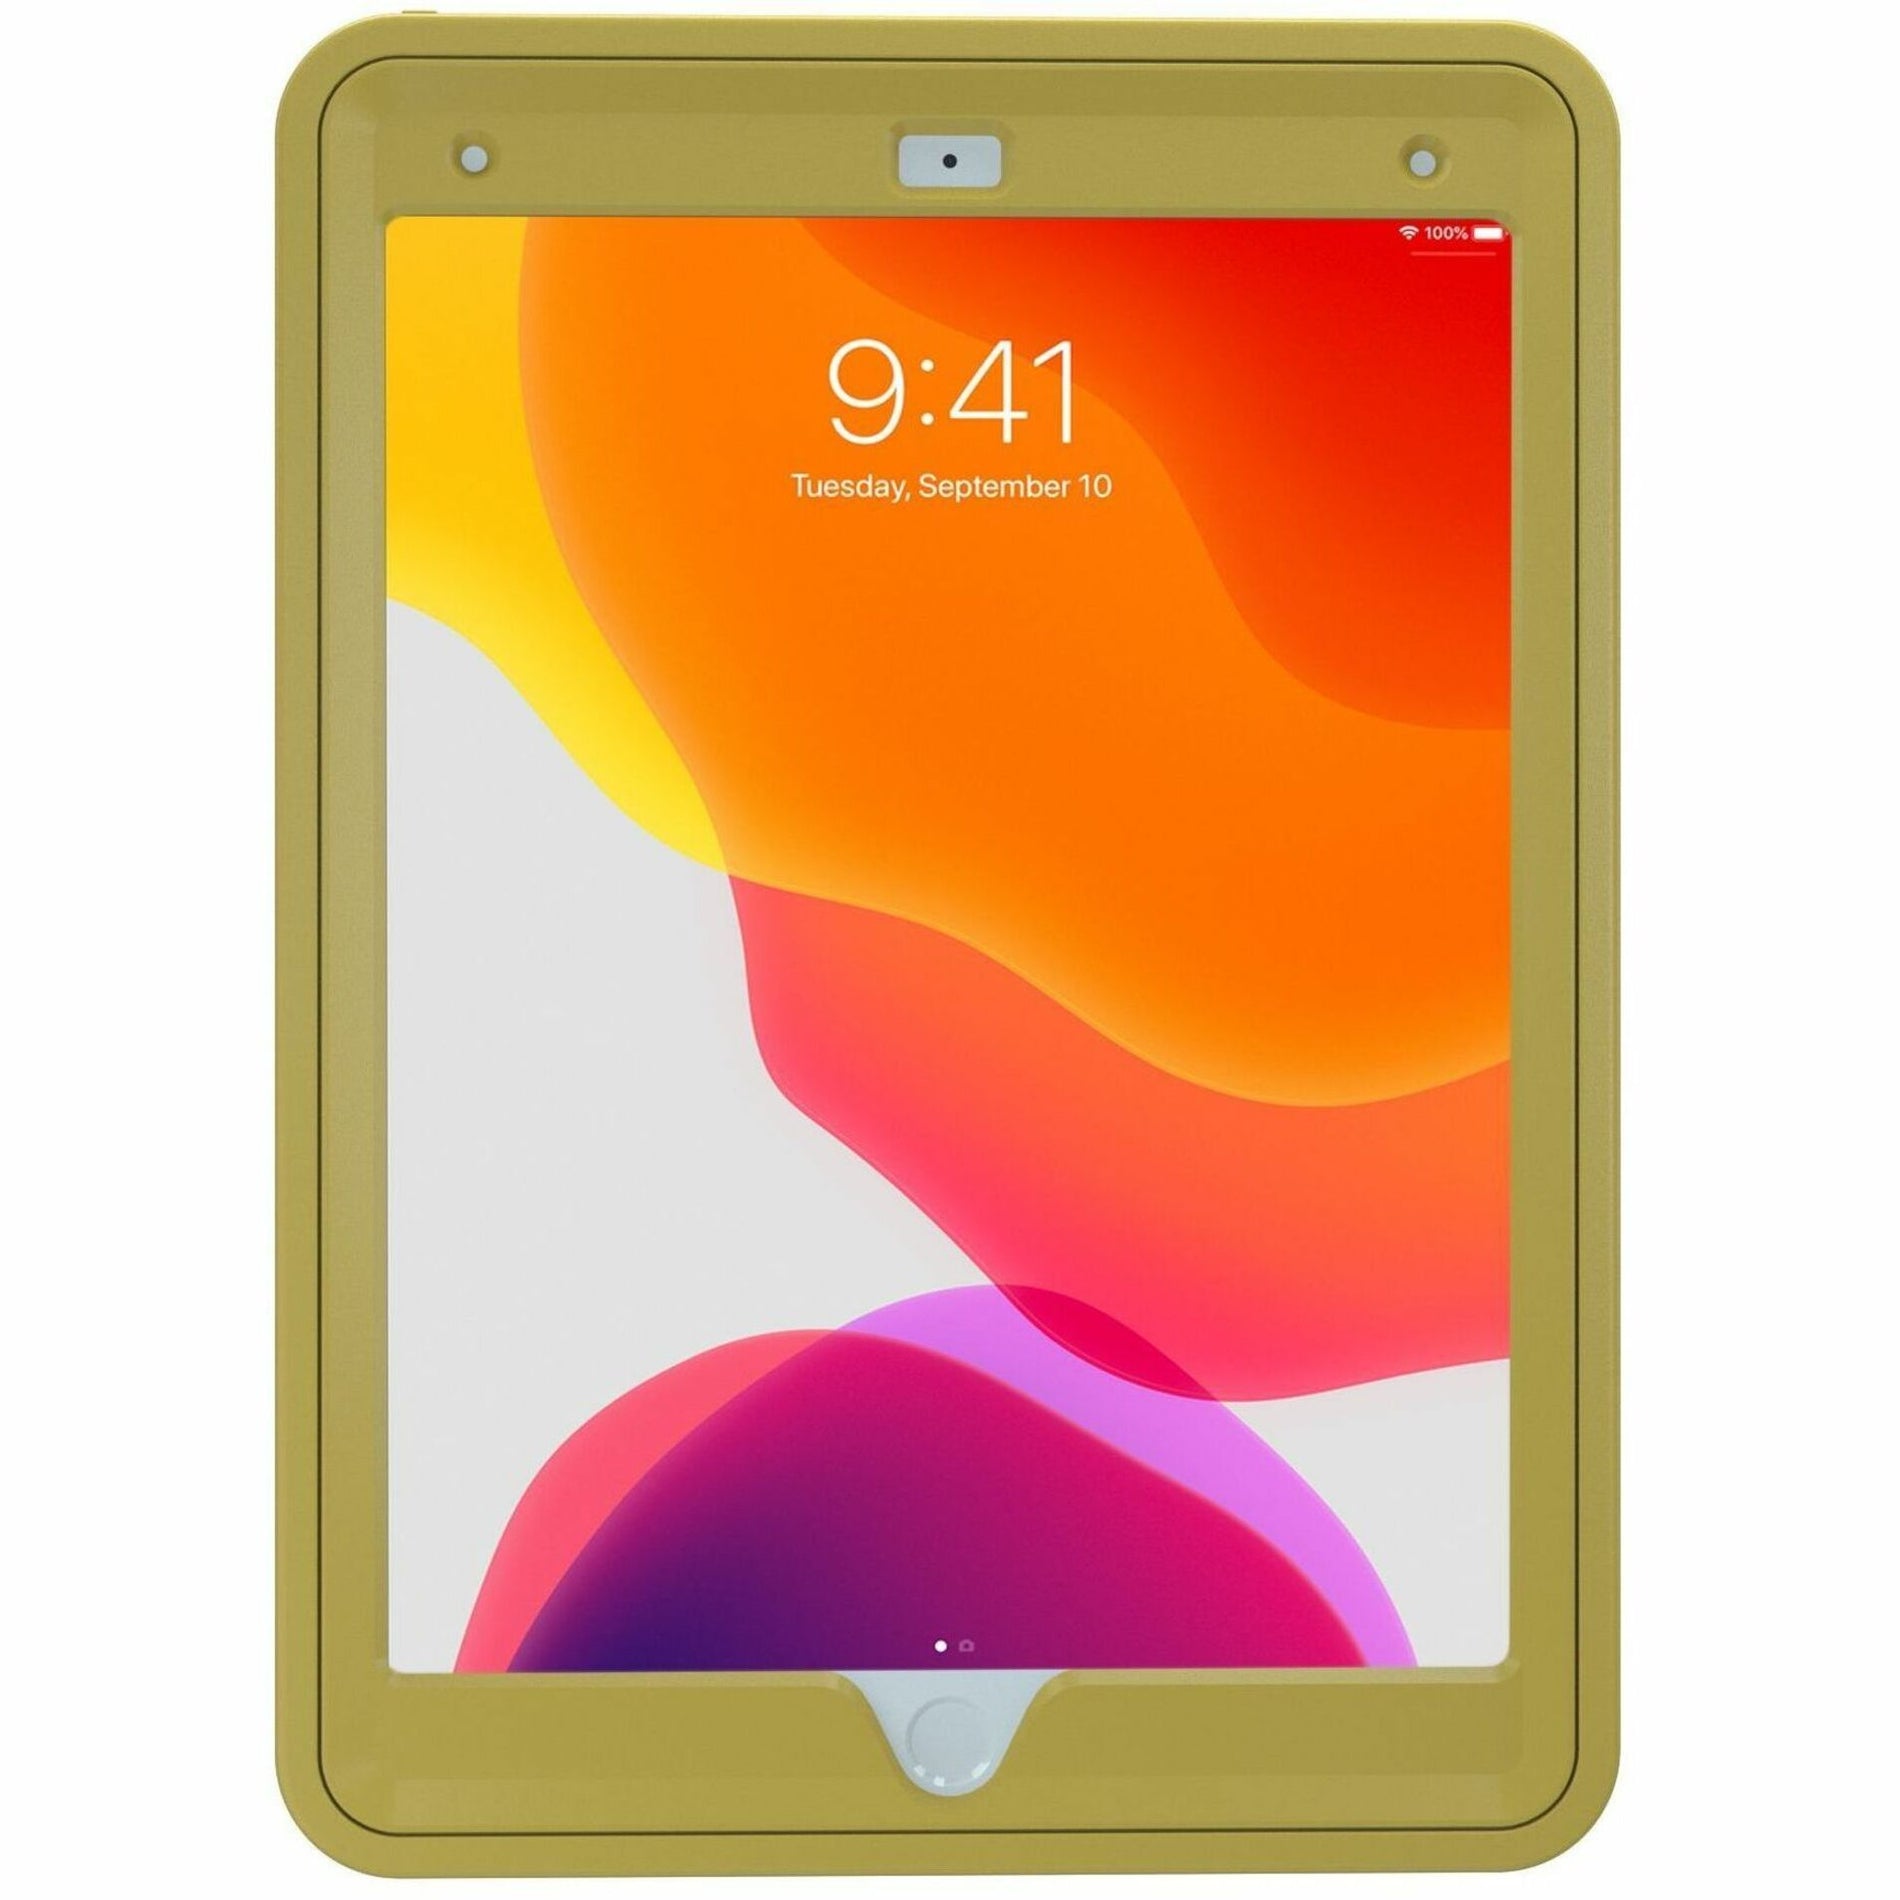 CTA Digital PAD-PCGK10Y Rotatable Grip Kickstand w/ Built-in 360 Yellow Protective Case, Tablet Case for iPad Pro, iPad (7th Generation), iPad (9th Generation), iPad (8th Generation), iPad Air (3rd Generation)